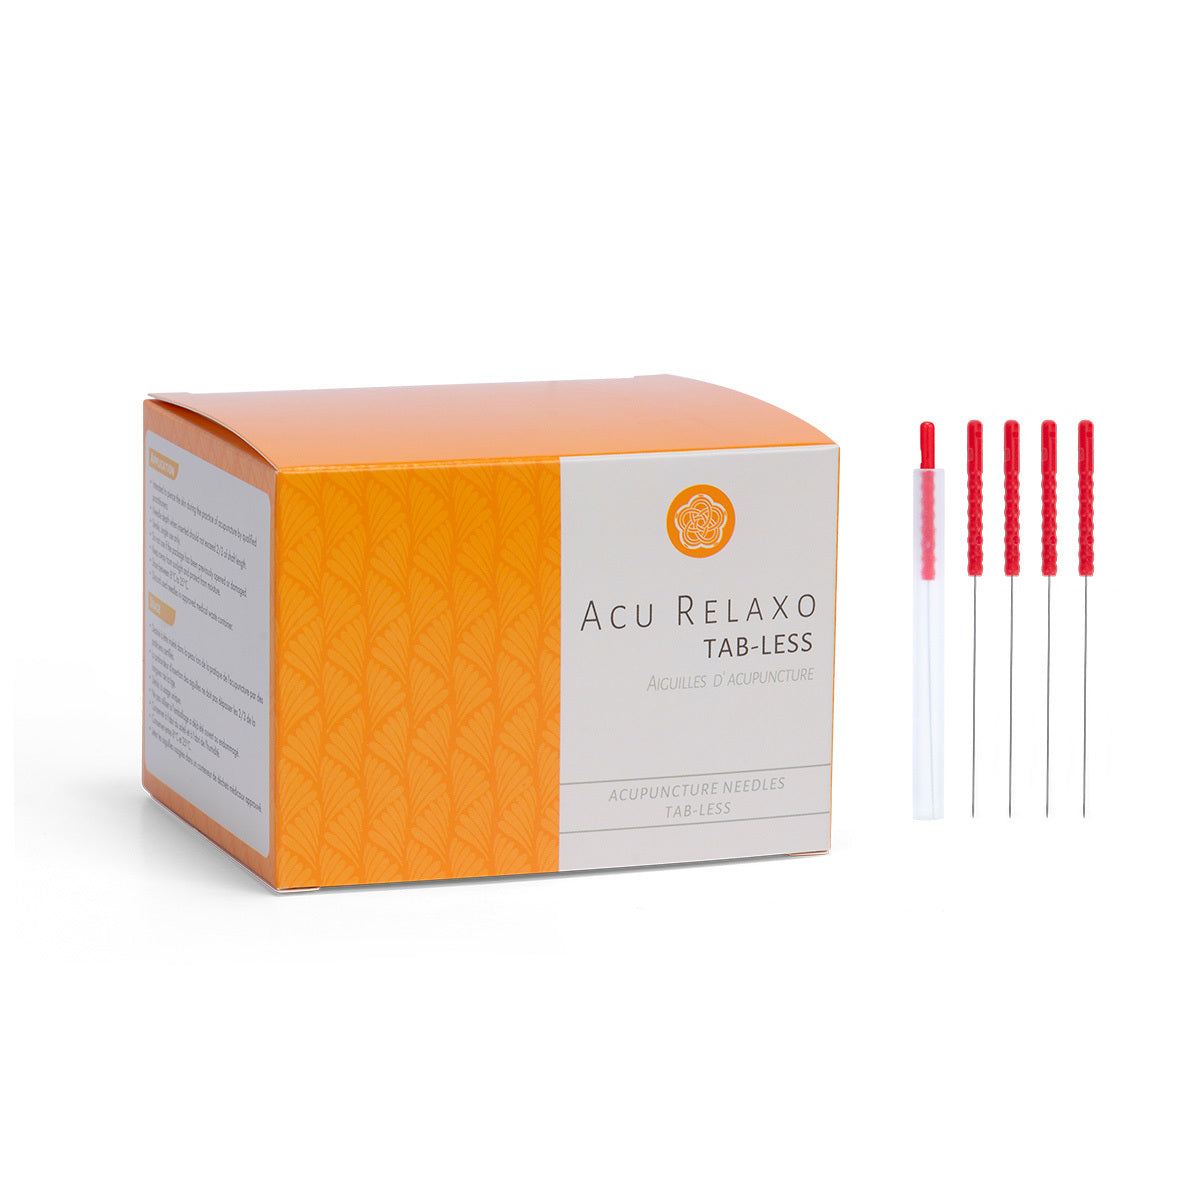 Acu Relaxo Tab-less Acupuncture Needles 500 pcs